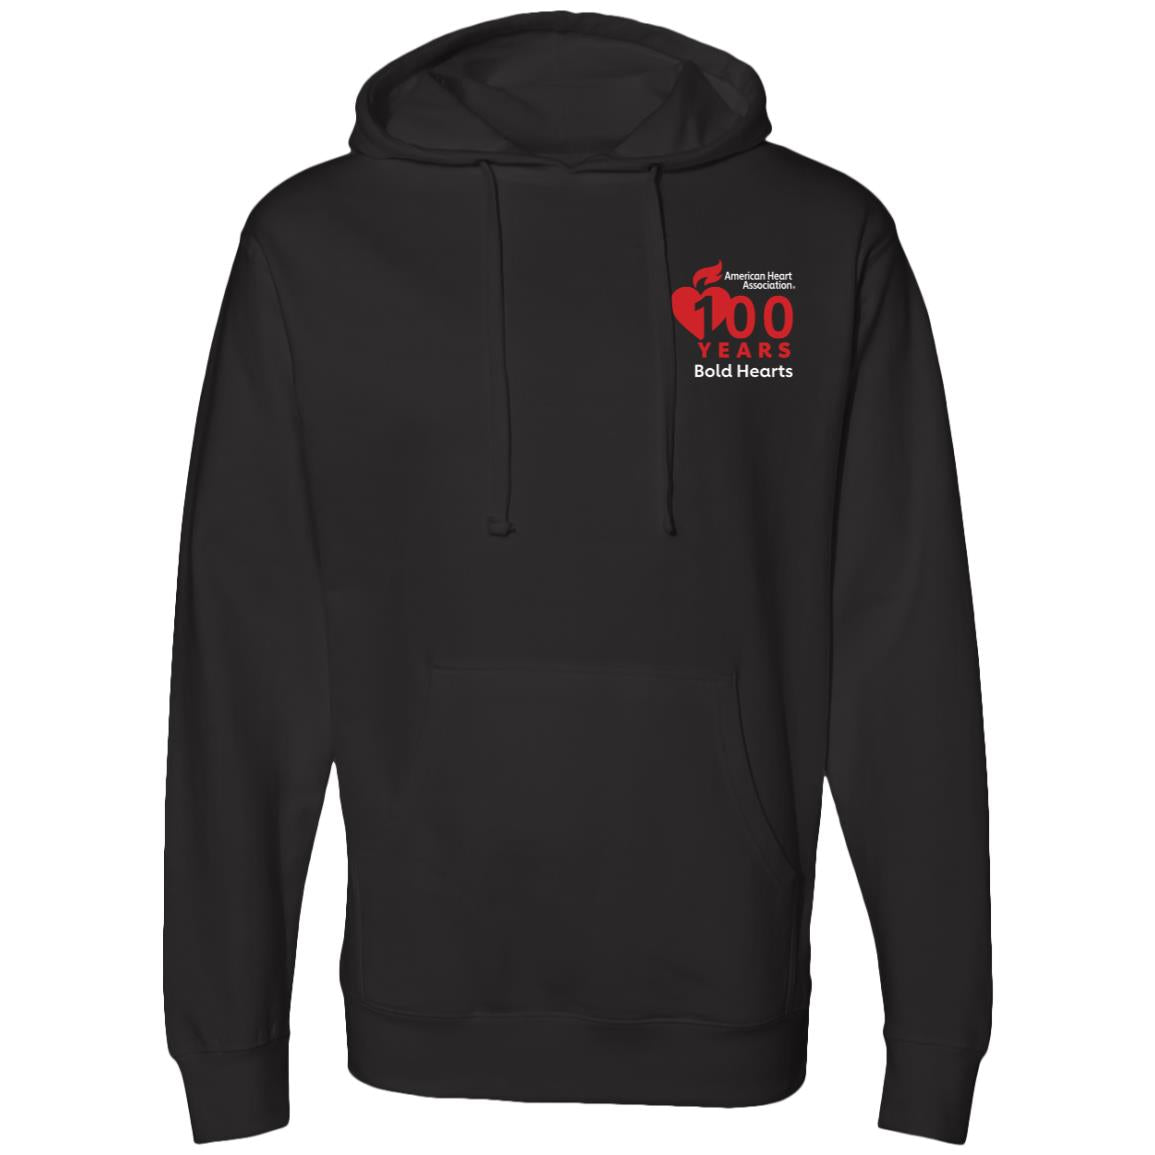 AHA 100 years Bold Hearts logo on left chest on black hoodie